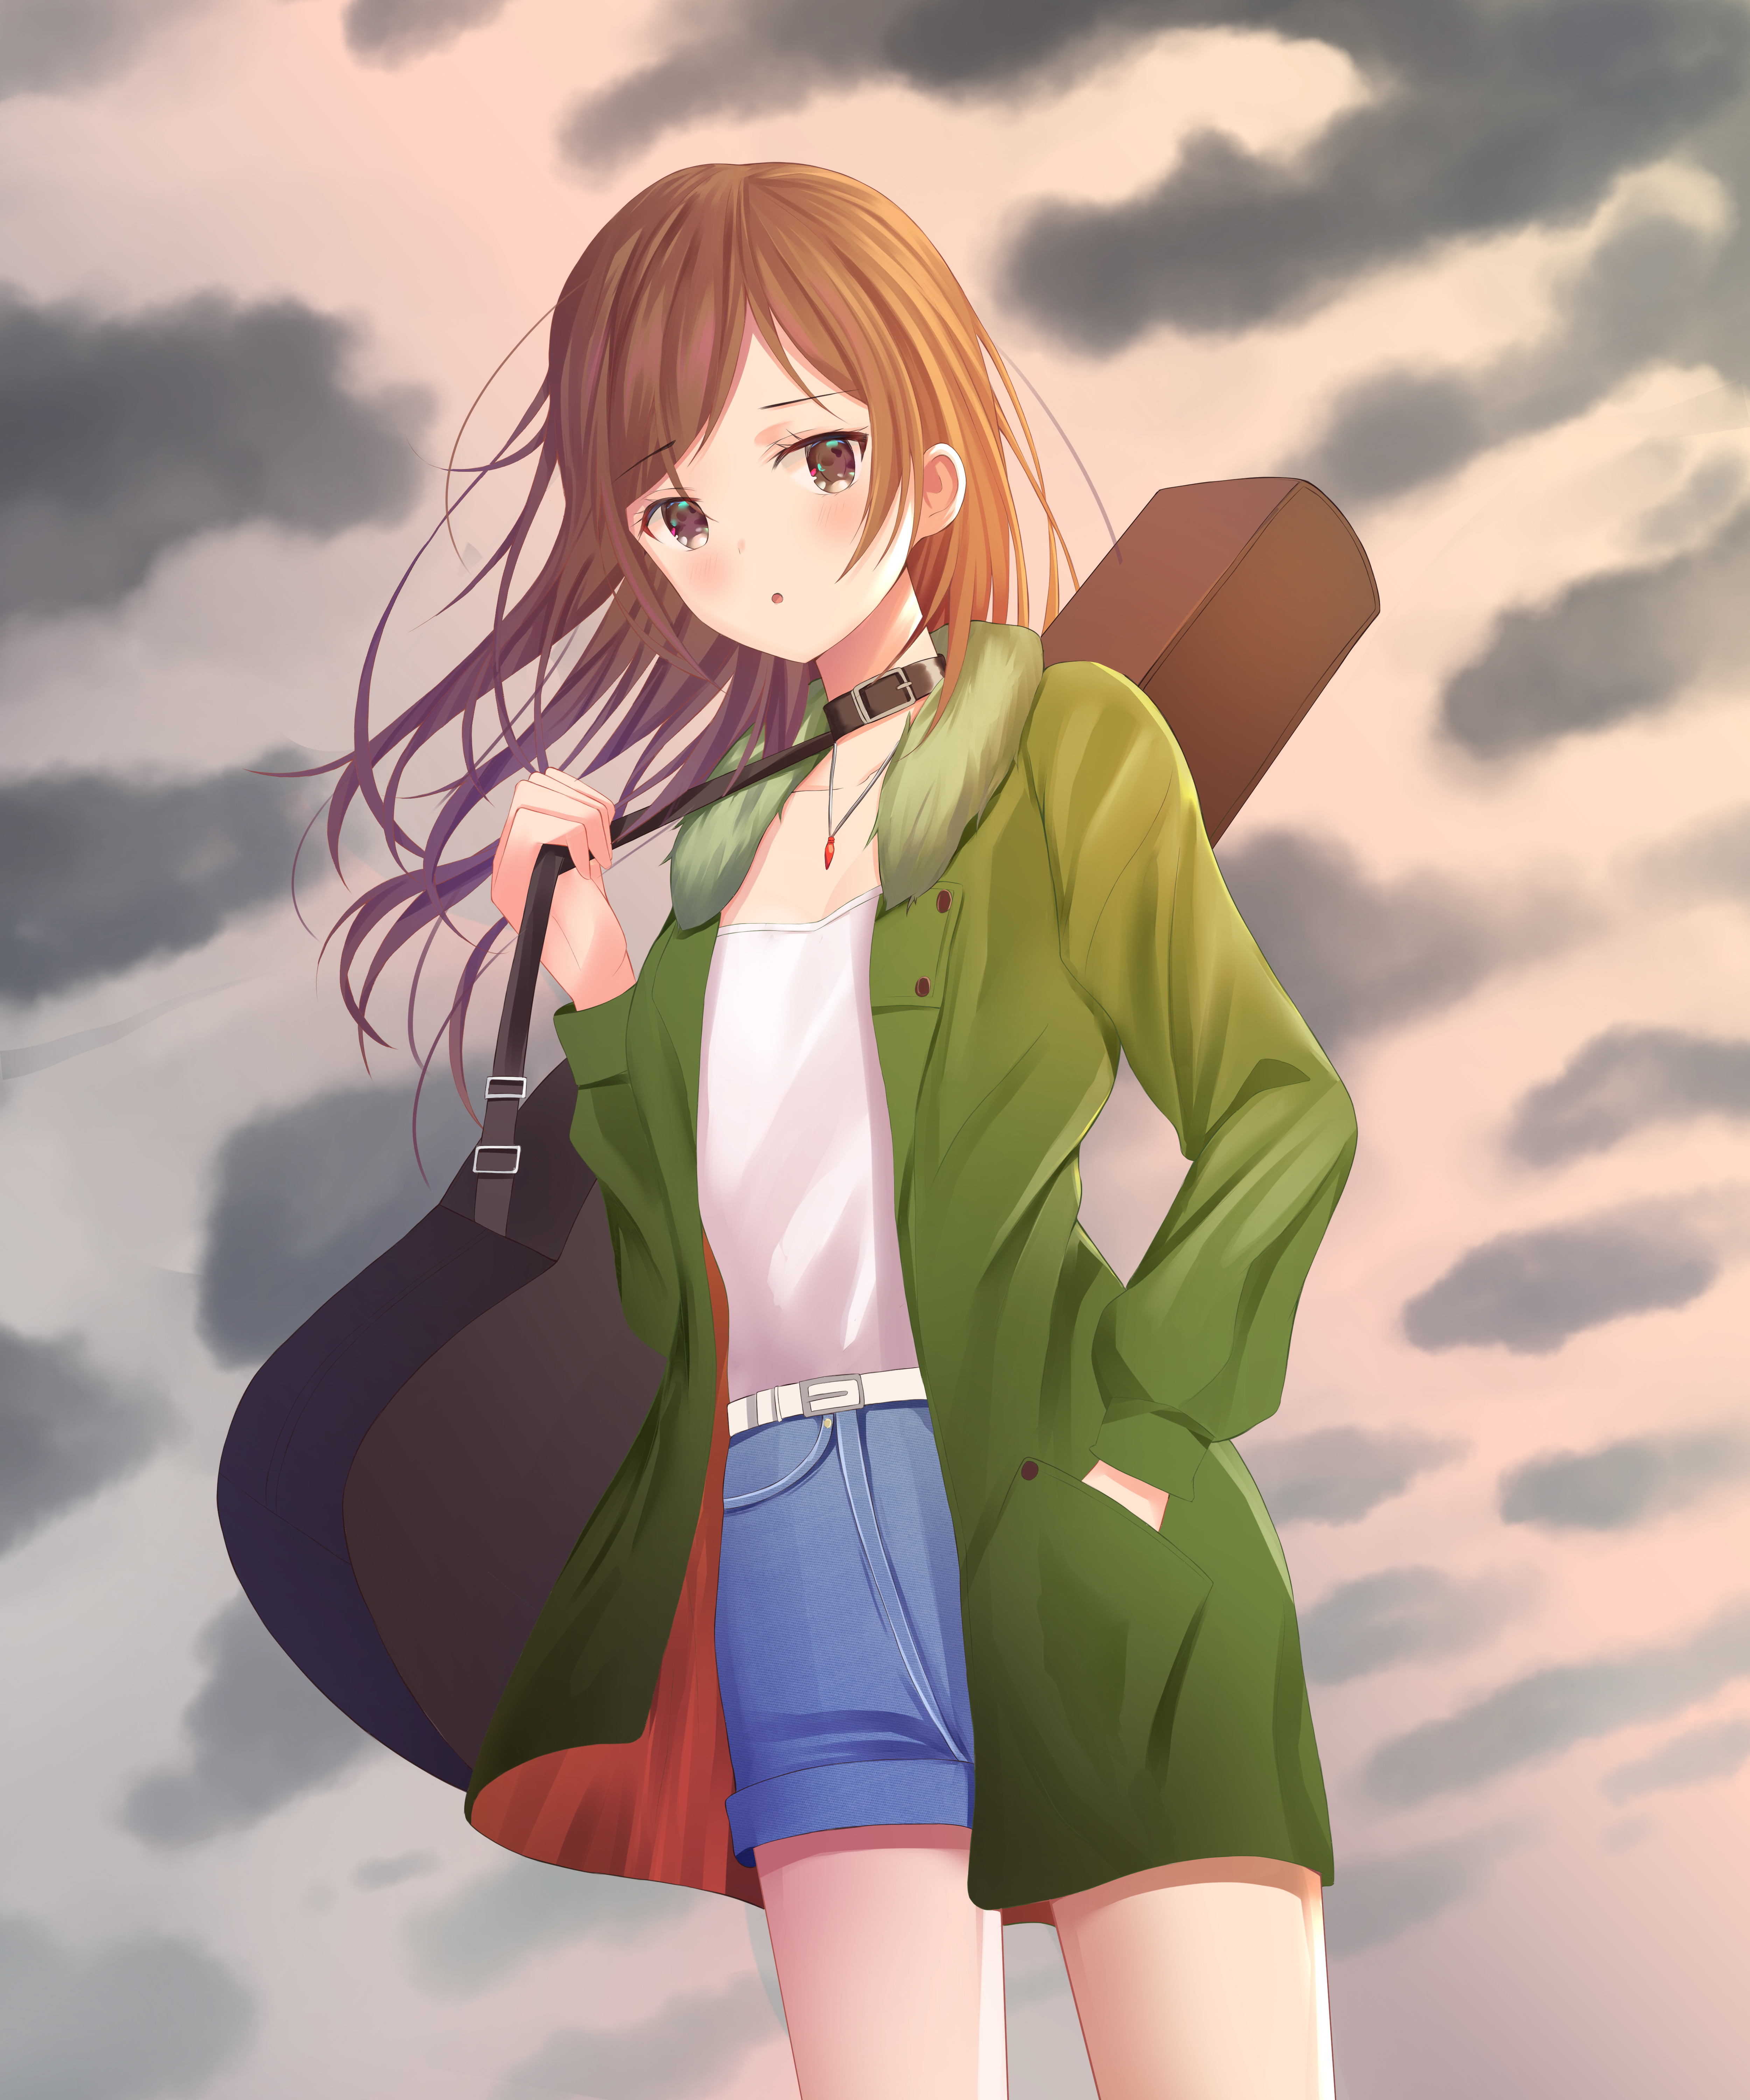 wallpapers girl, anime, clouds, guitar, case, sheath